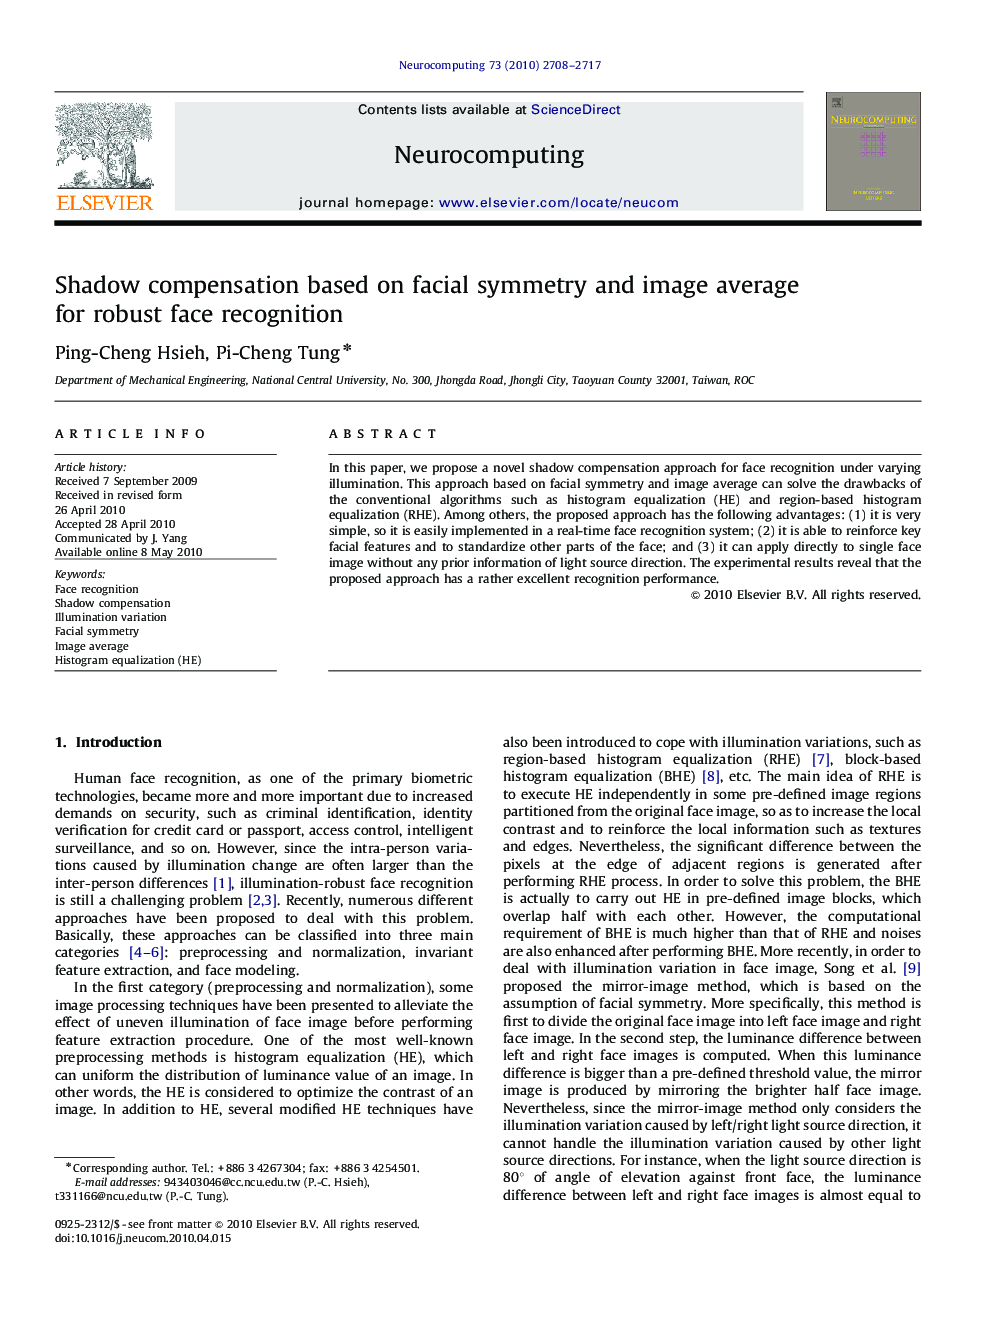 Shadow compensation based on facial symmetry and image average for robust face recognition